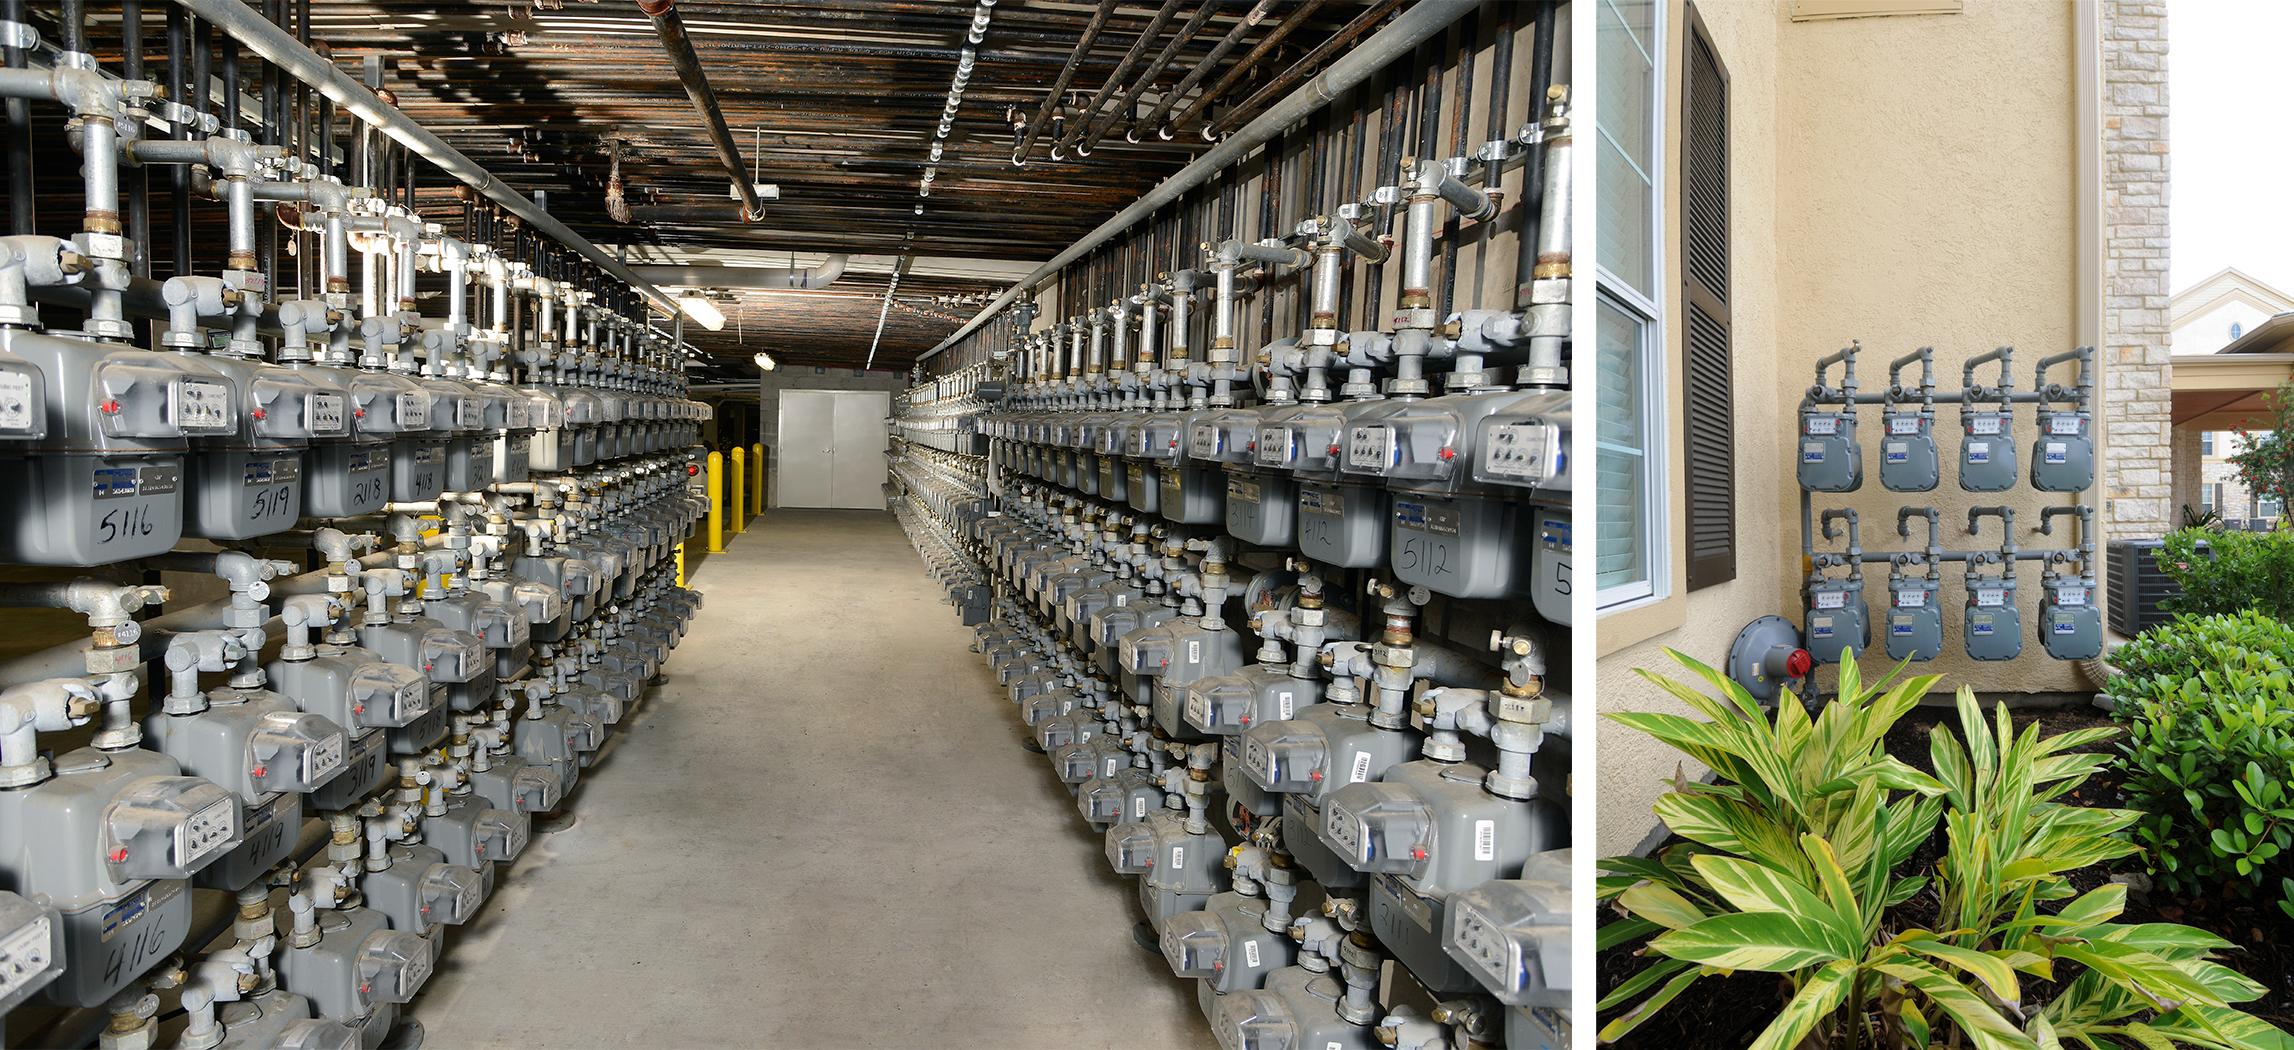 an aisle with multi-family gas meters to the left and right